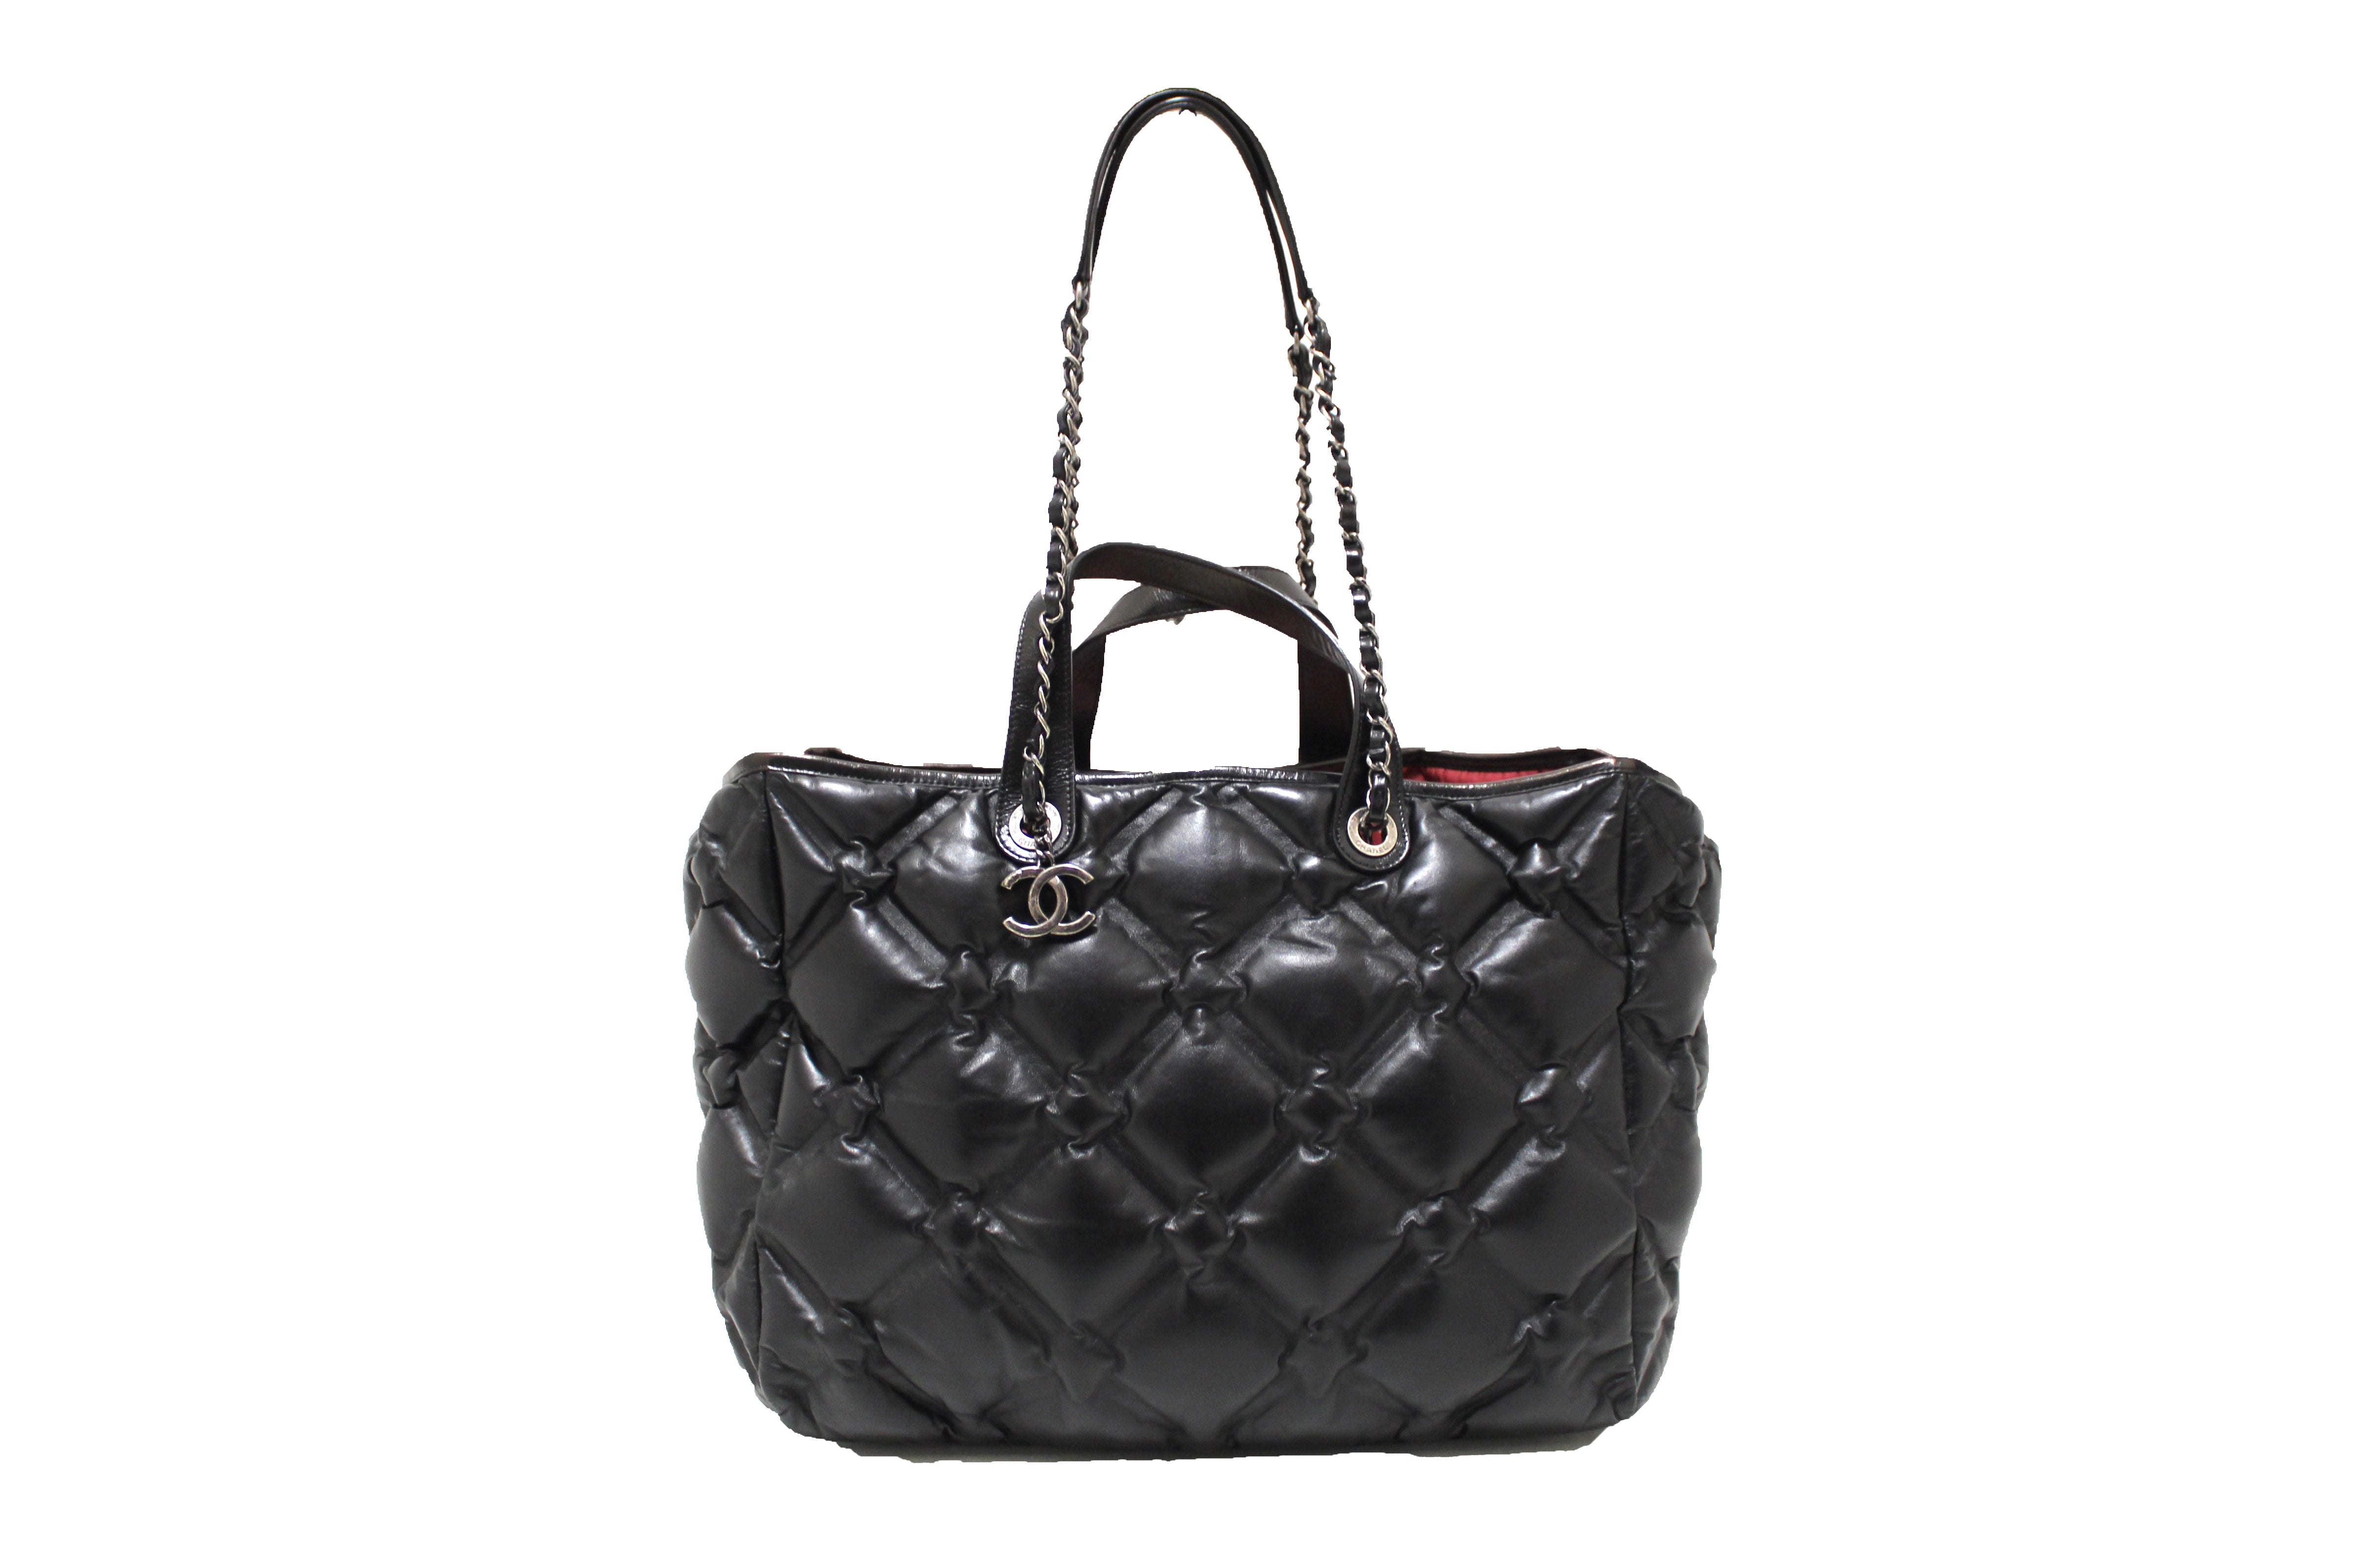 Authentic Chanel Black Bubble Quilted Lambskin Leather Large Tote